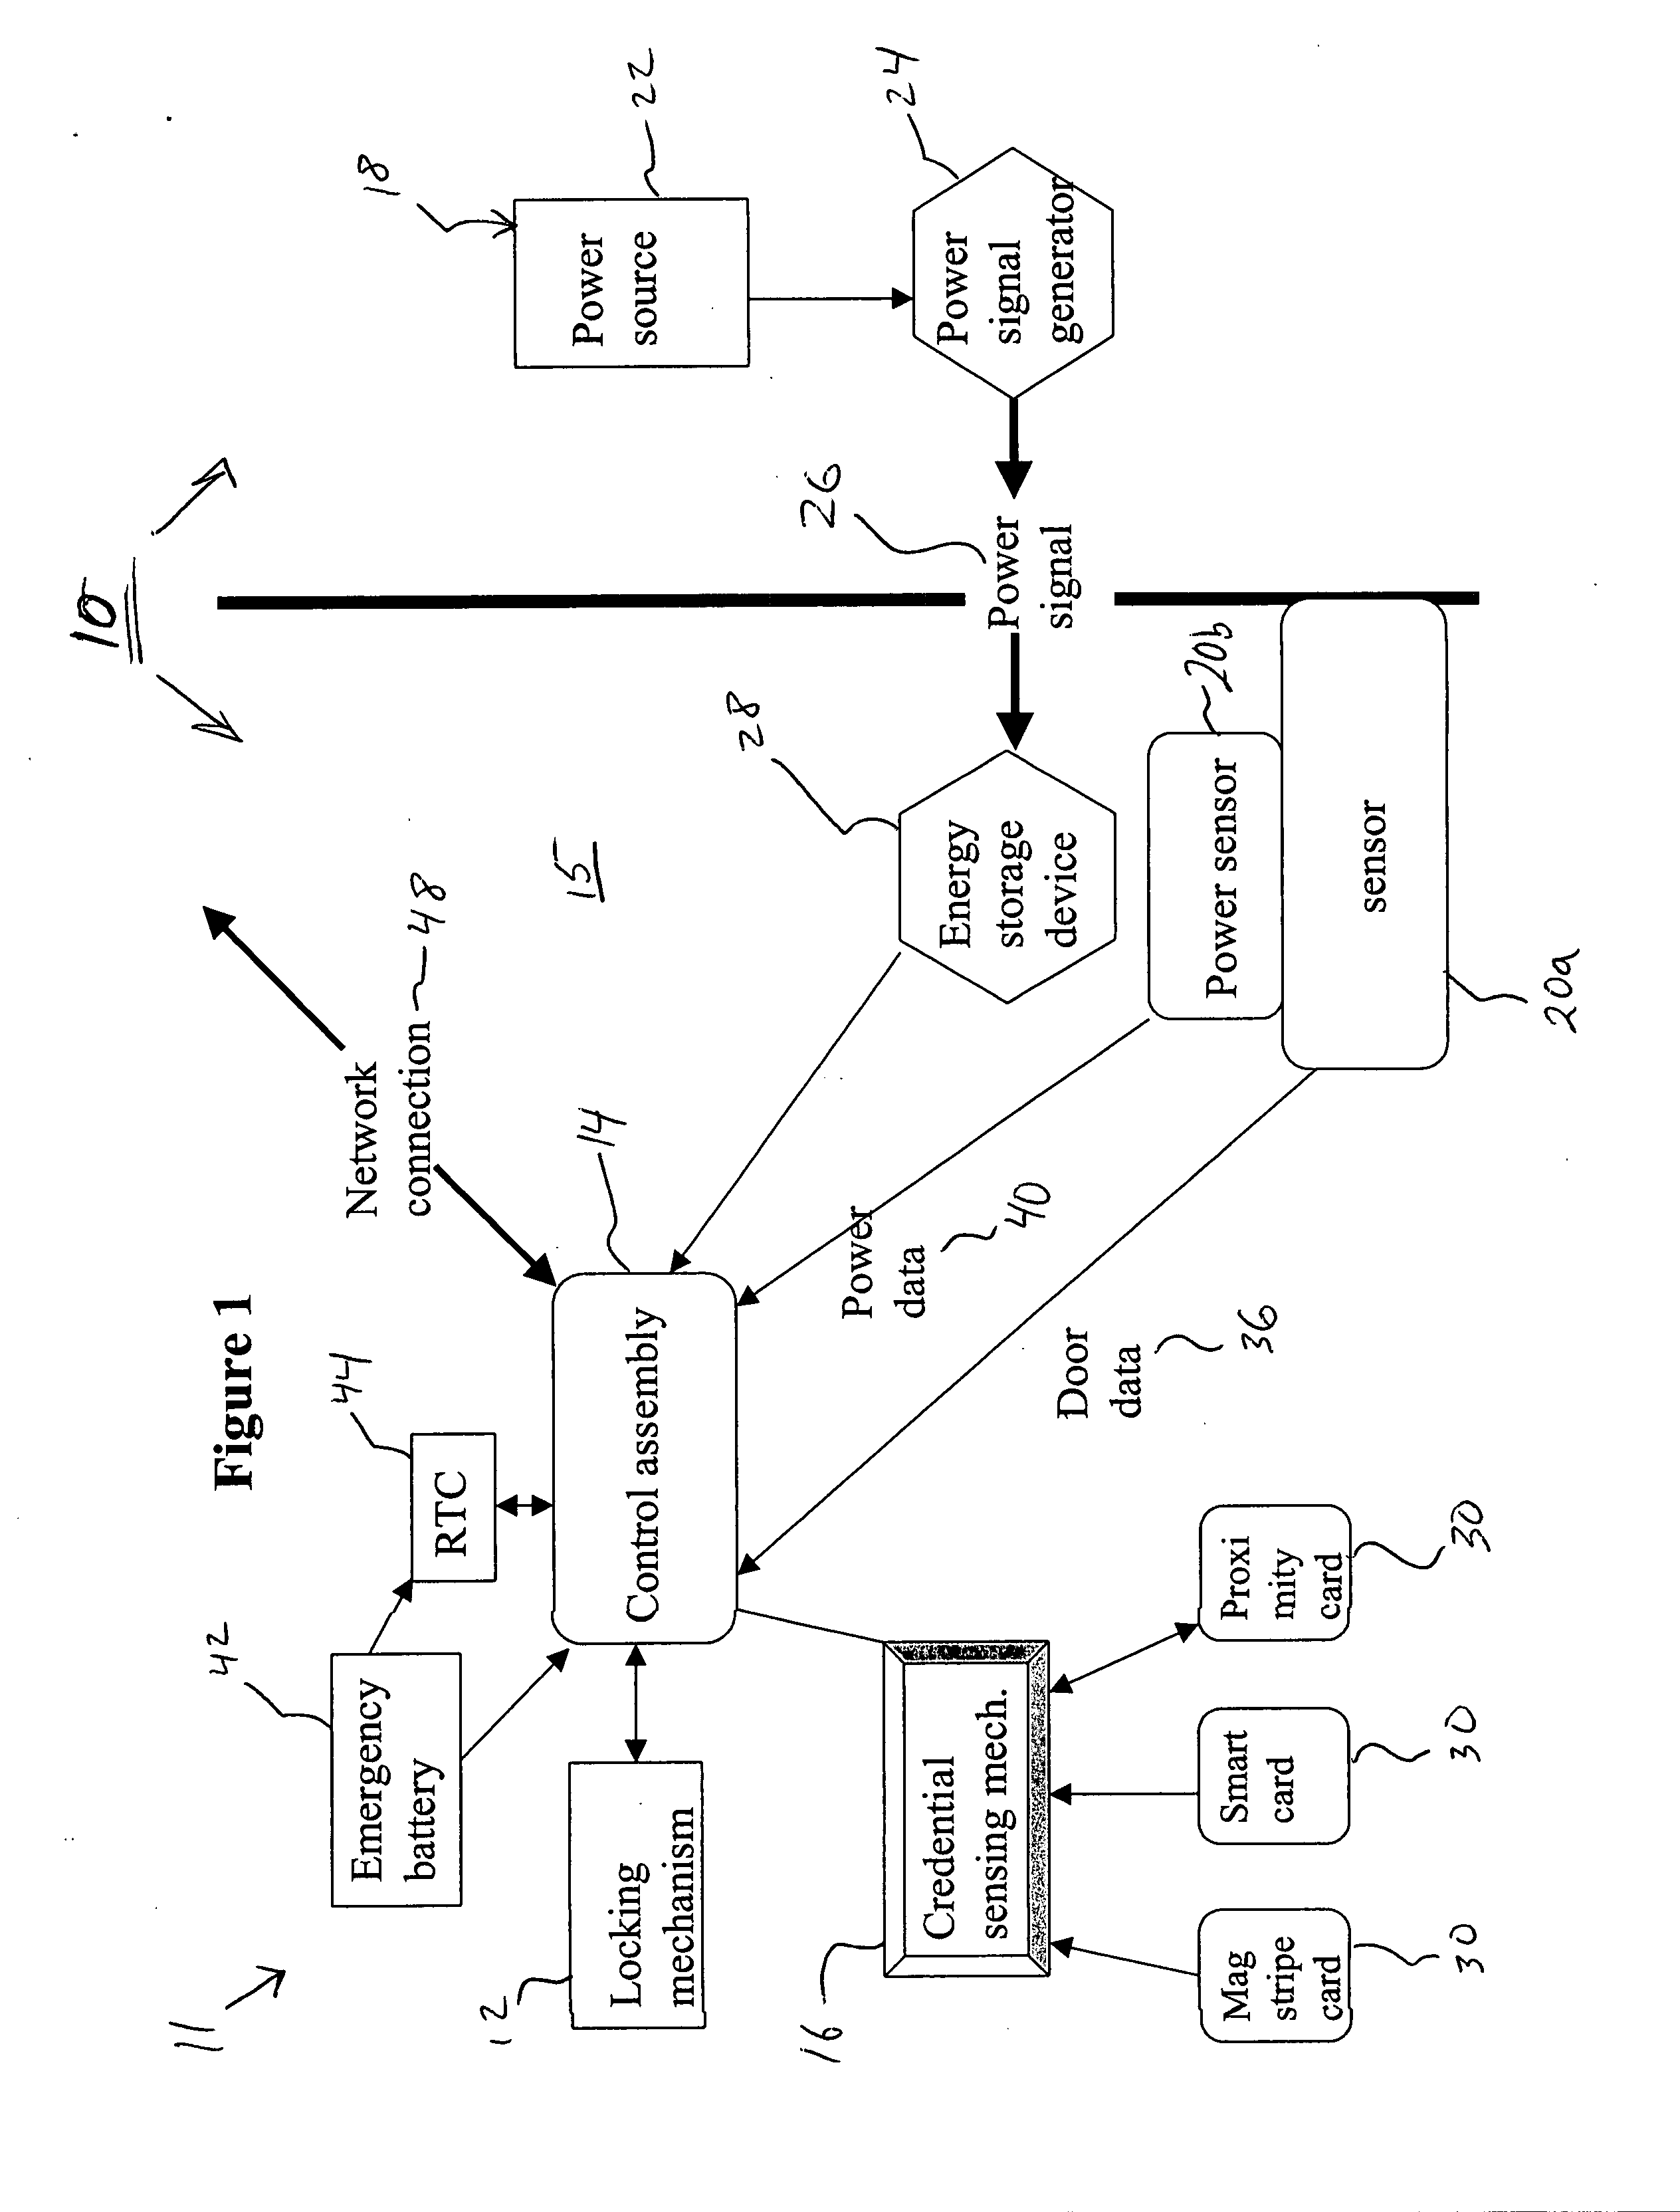 Power management lock system and method